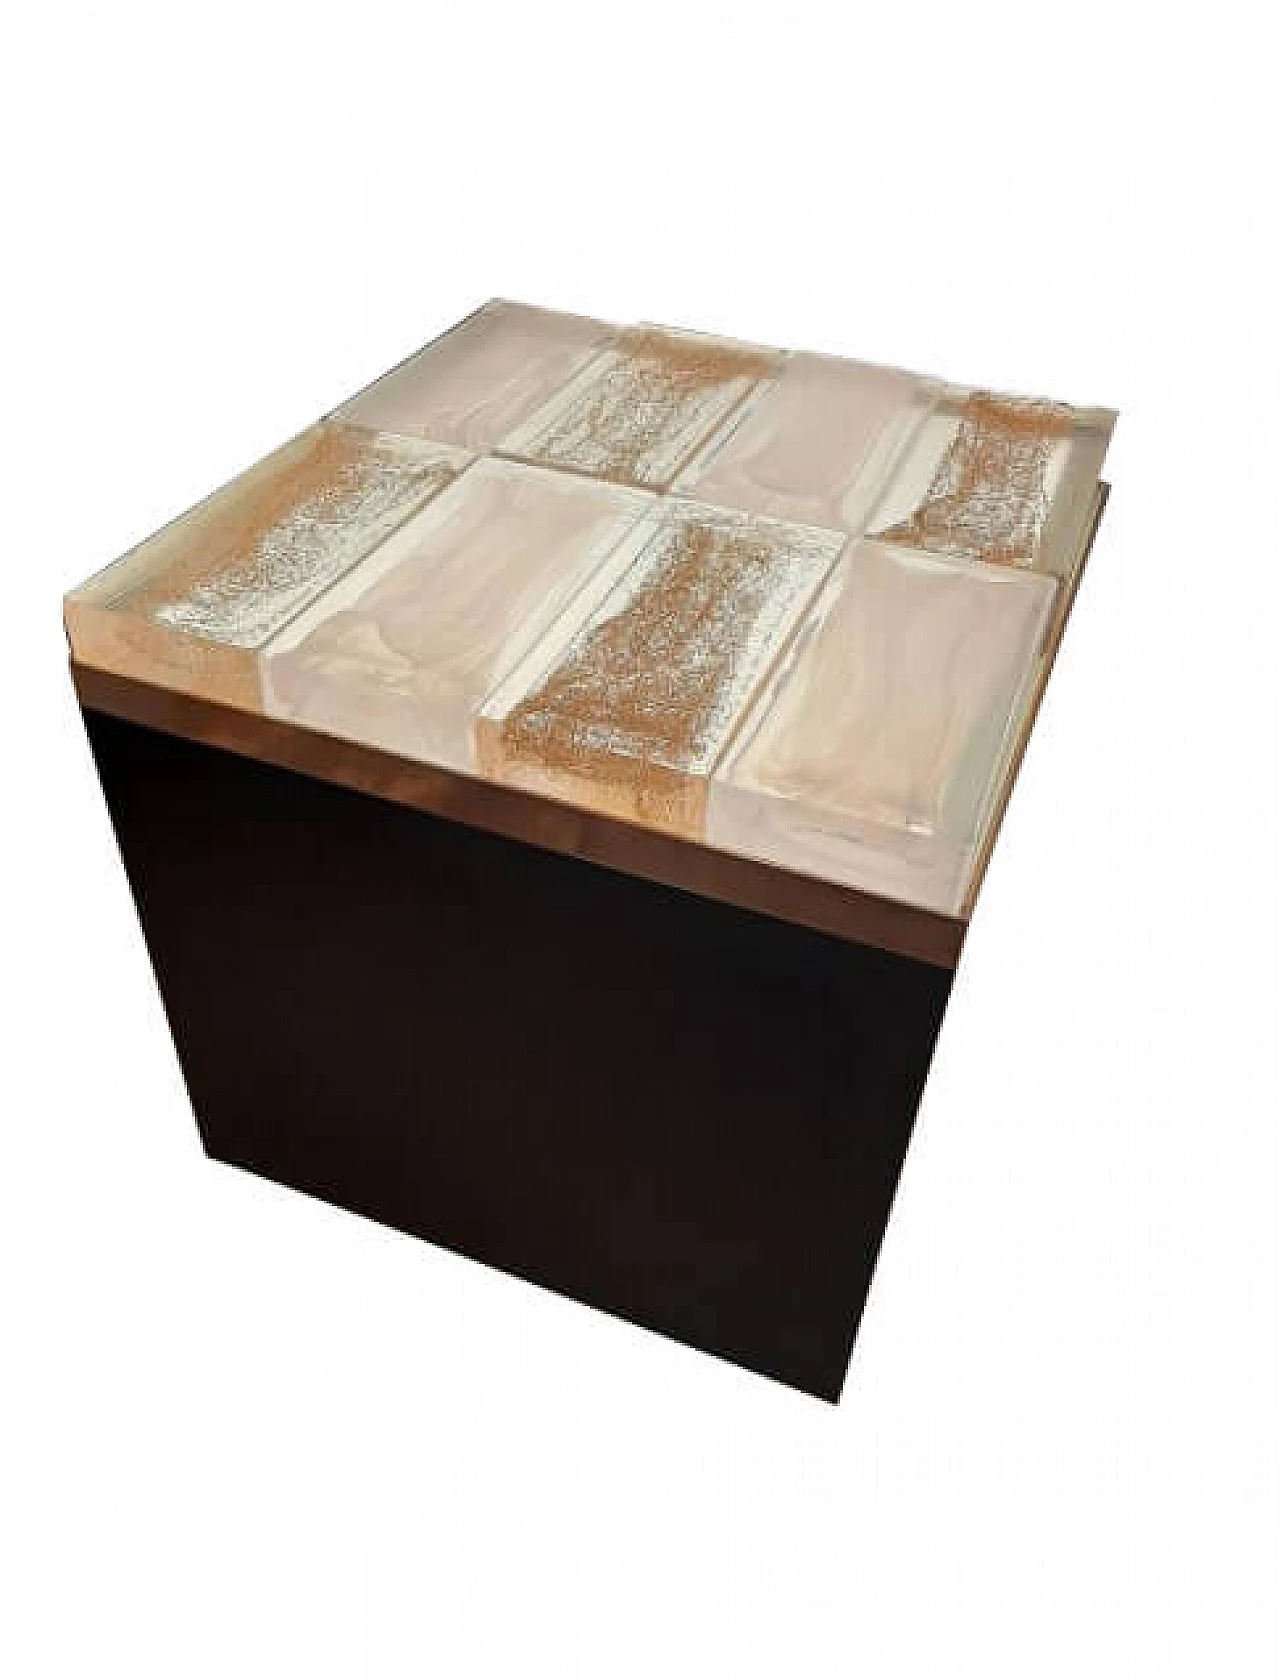 Nightstand or coffee table in decorated Murano glass bricks, wood and brass, 2000 1263307